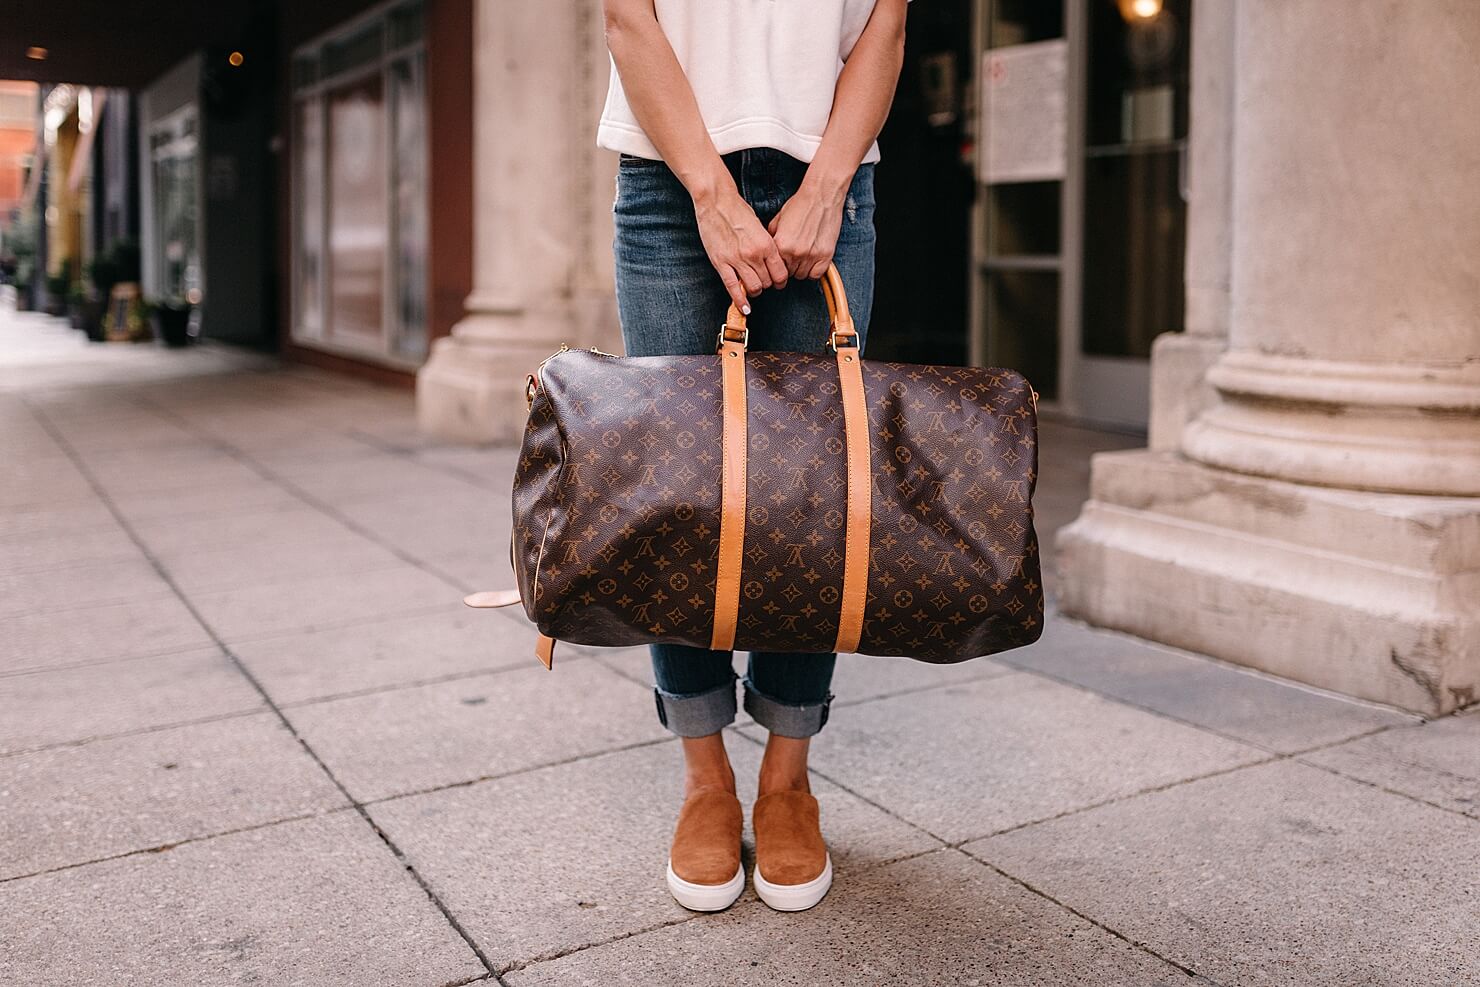 lv duffle bag outfit